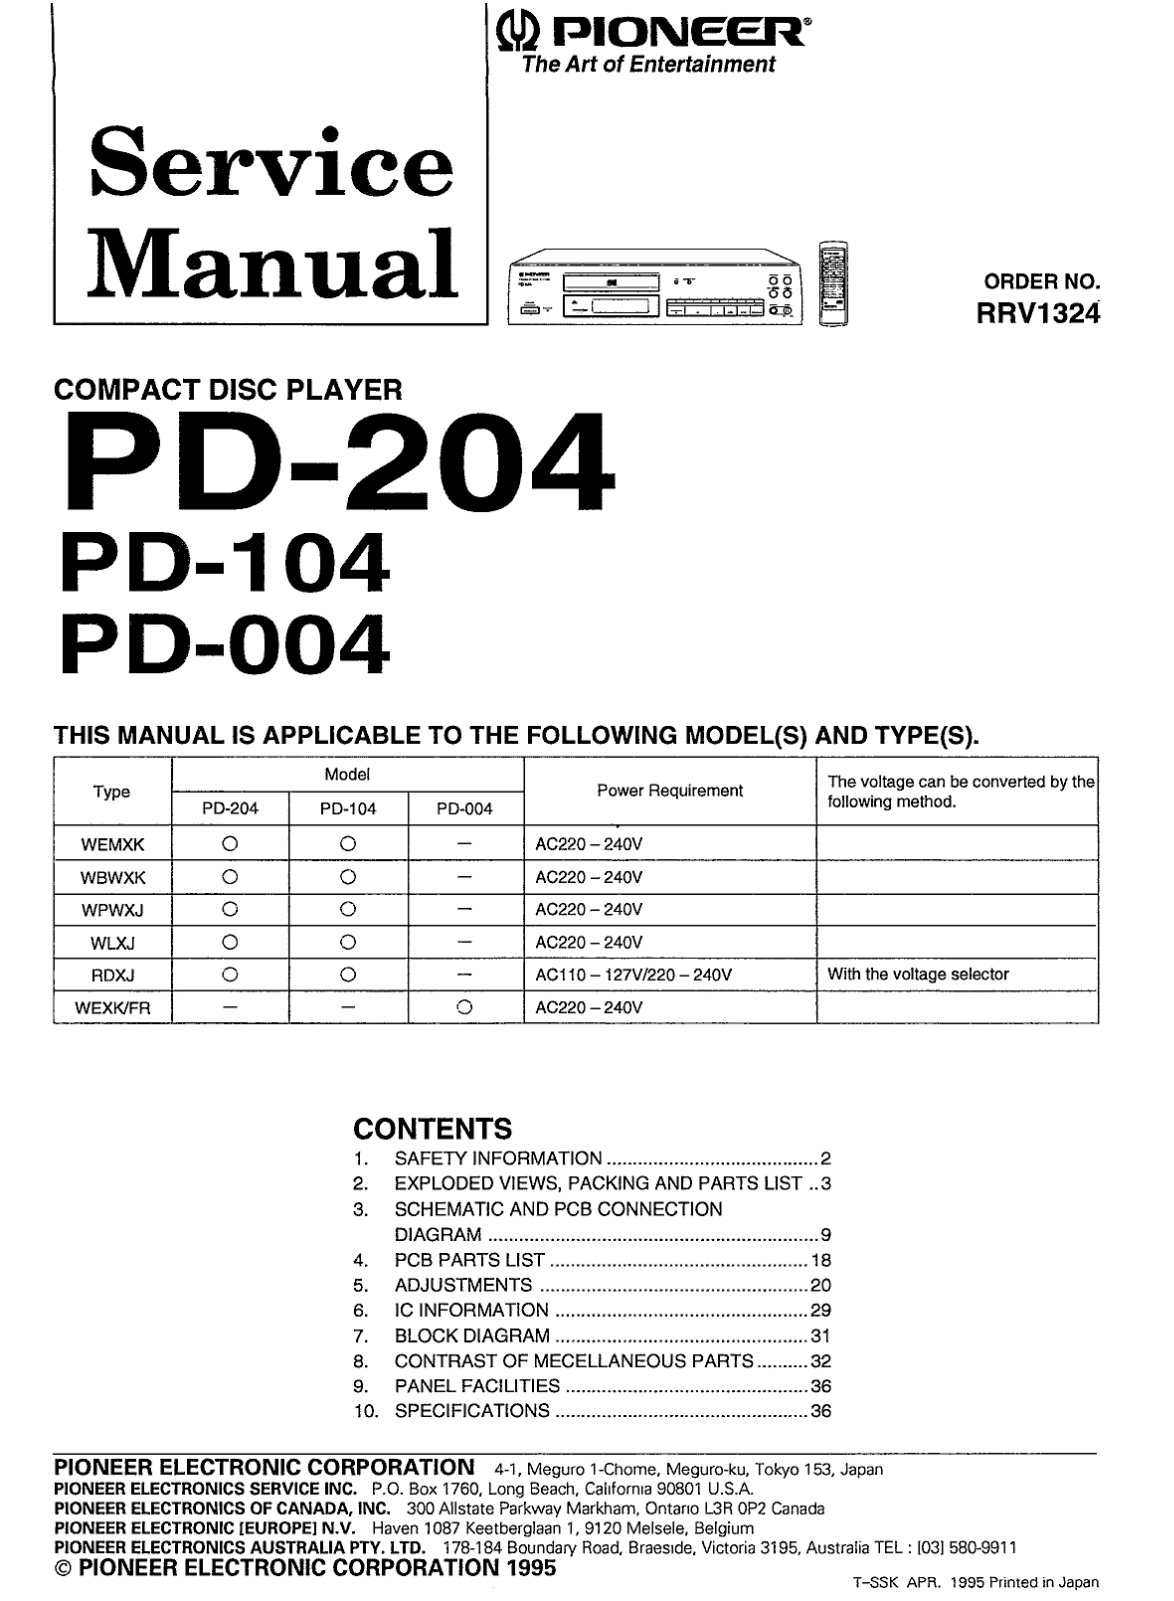 Pioneer PD-004, PD-104, PD-204 Service manual